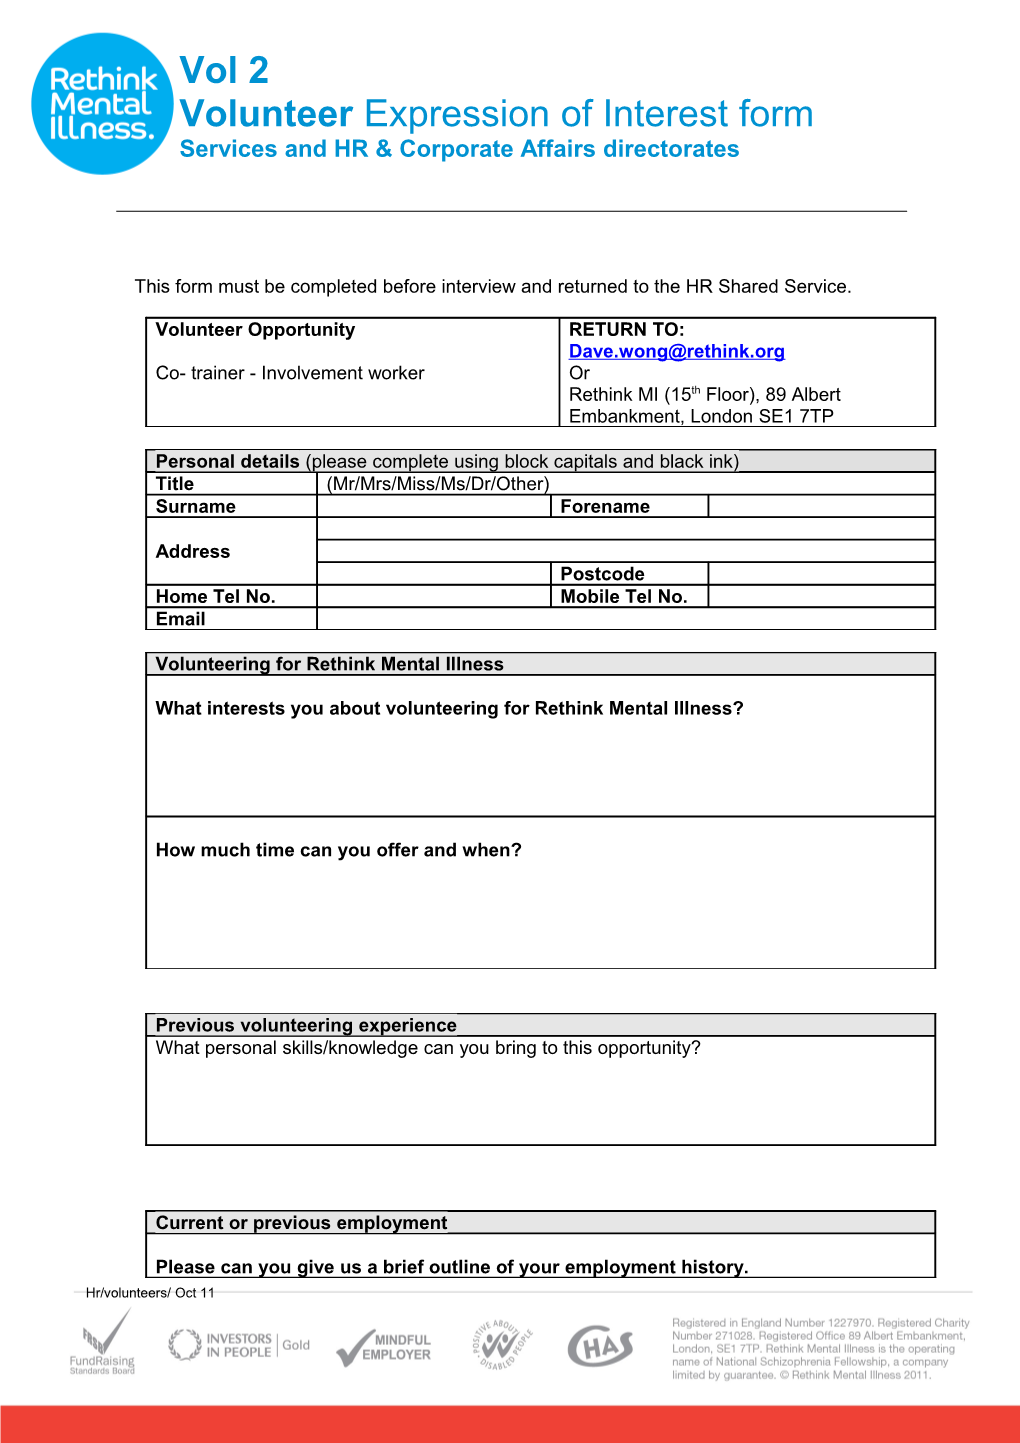 This Form Must Be Completed Before Interview and Returned to the HR Shared Service